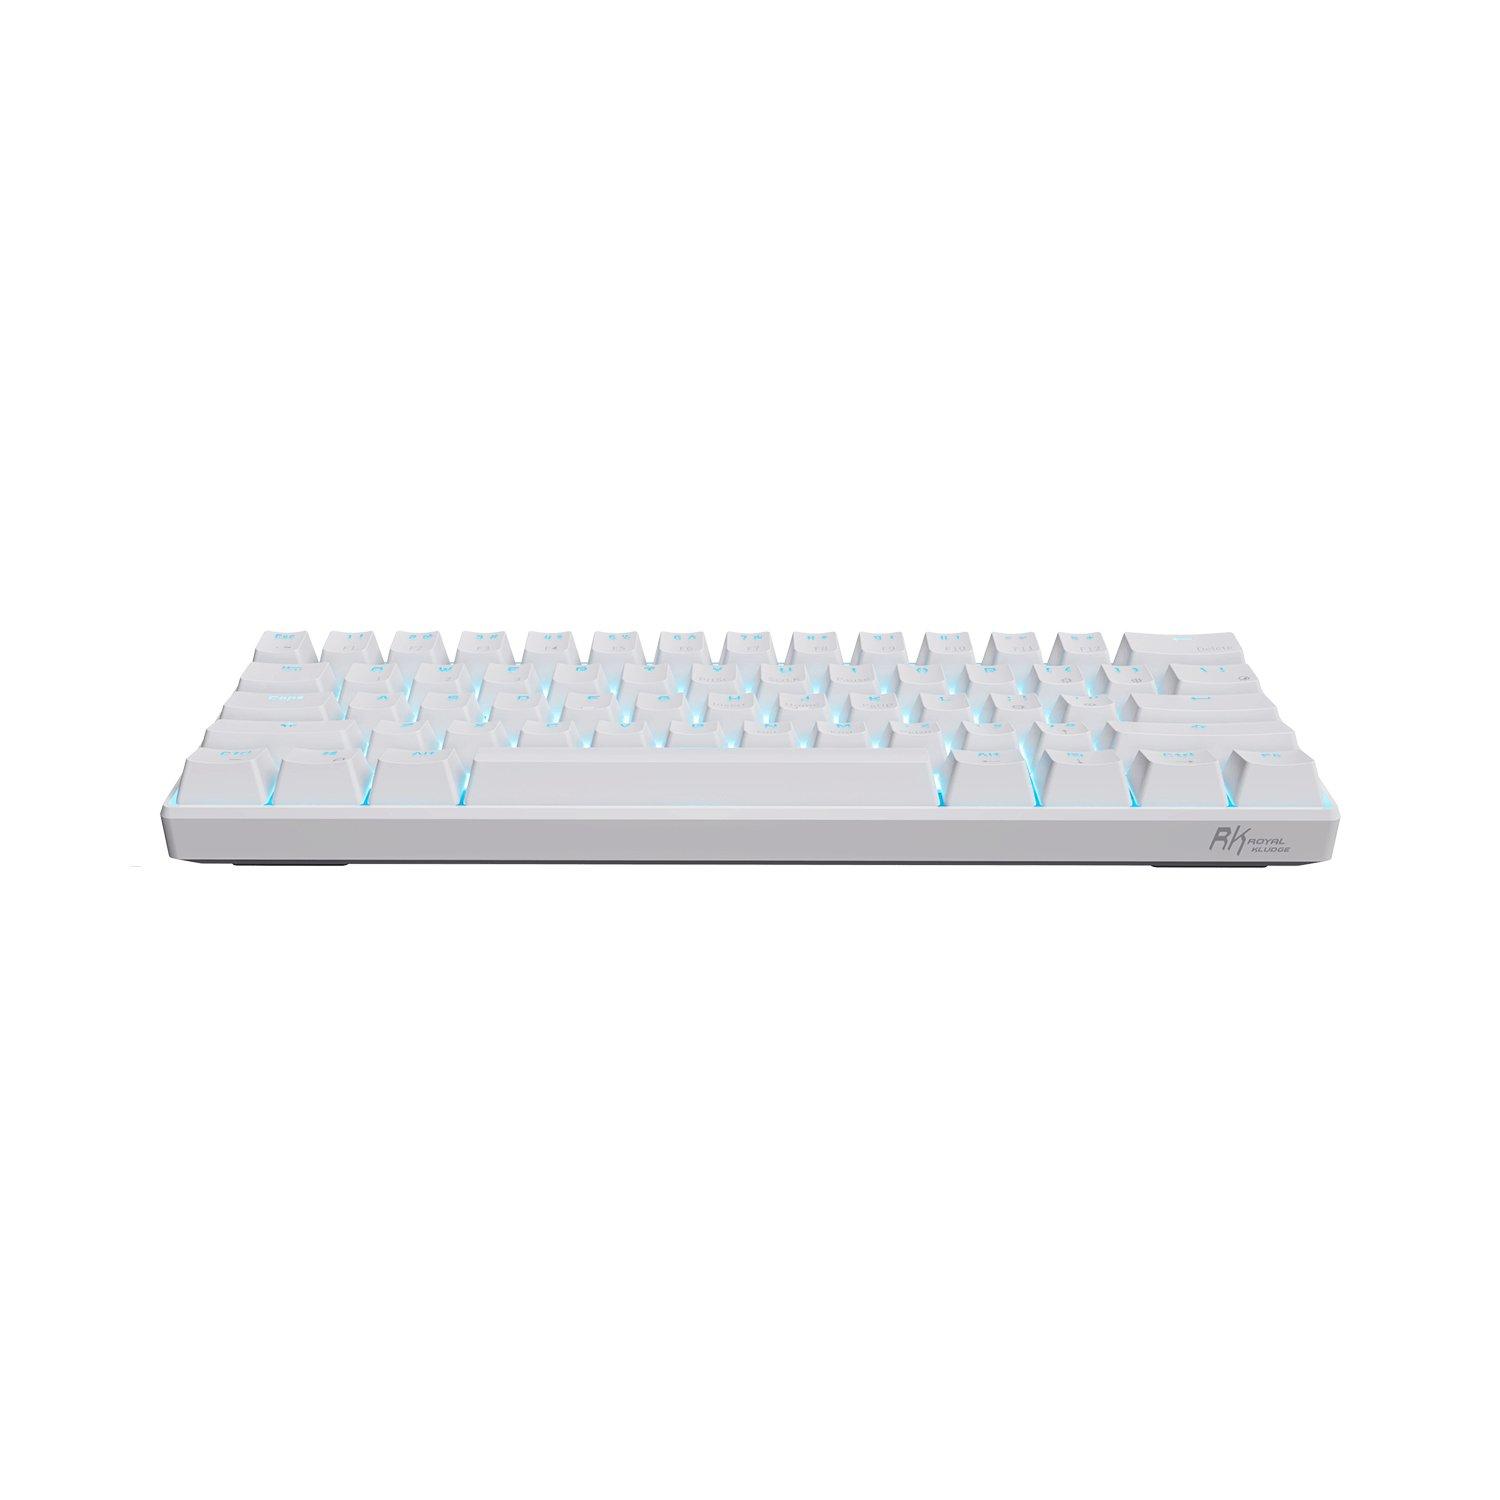  RK ROYAL KLUDGE RK61 Wired 60% Mechanical Gaming Keyboard RGB  Backlit Ultra-Compact Hot-Swappable Red Switch White : Video Games